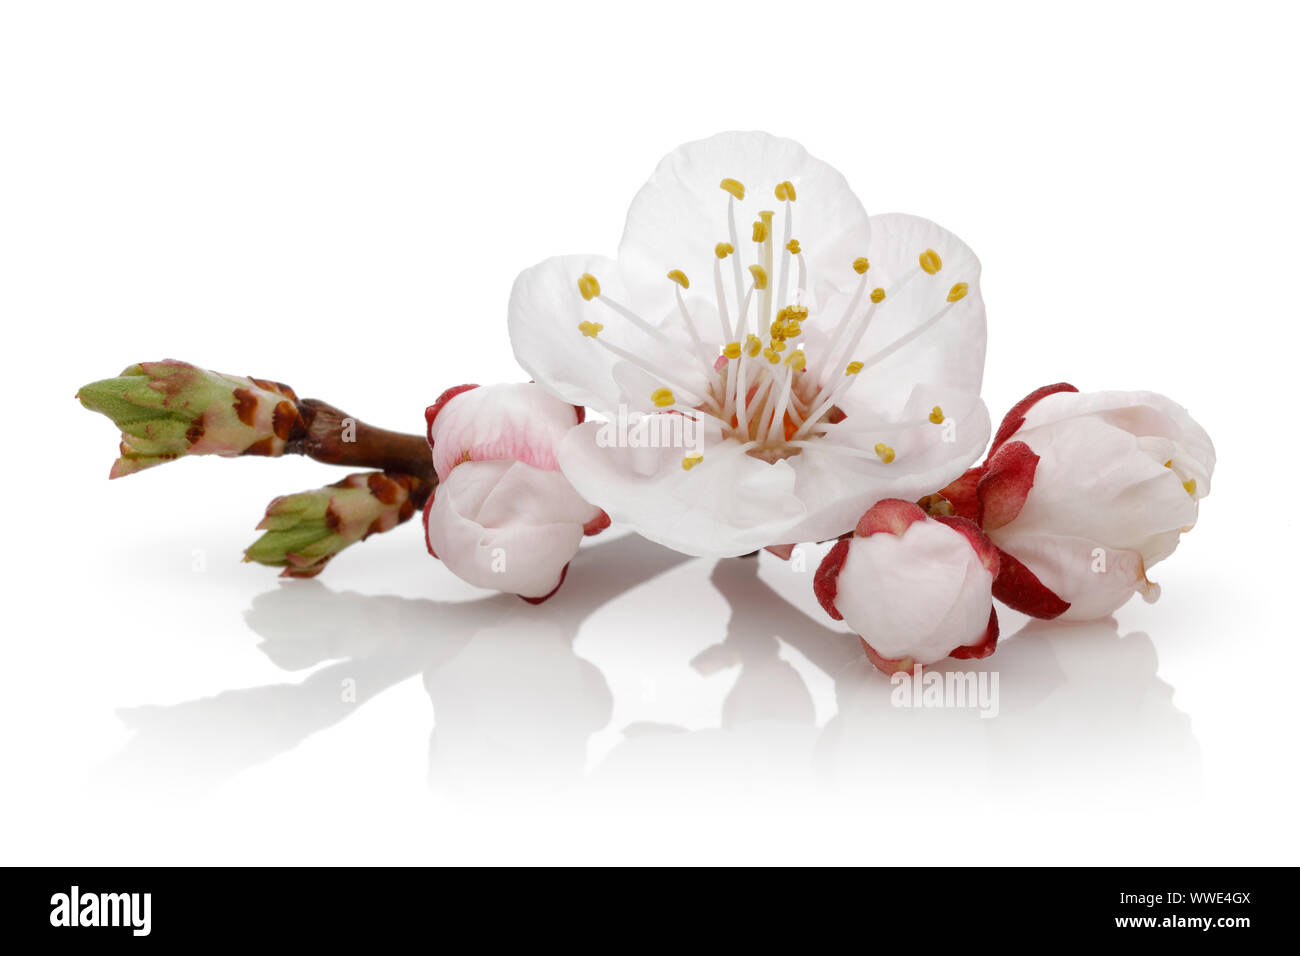 Almond flower with buds isolated on white background Stock Photo